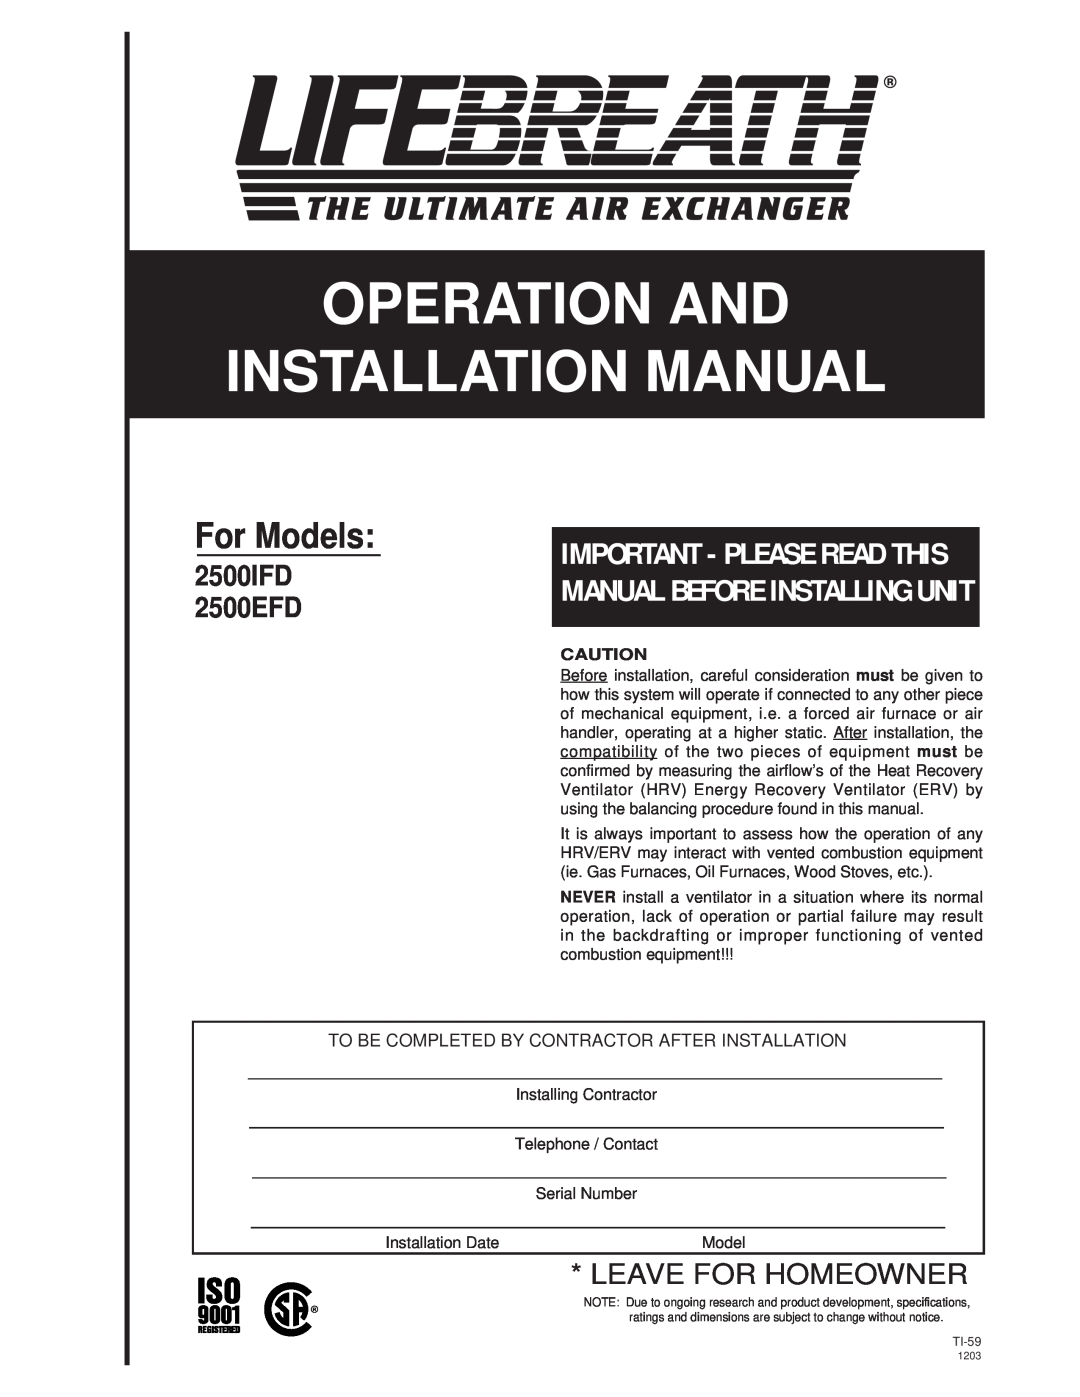 Lifebreath 2500EFD specifications For Models, 2500IFD, Manual Before Installing Unit, Operation And Installation Manual 